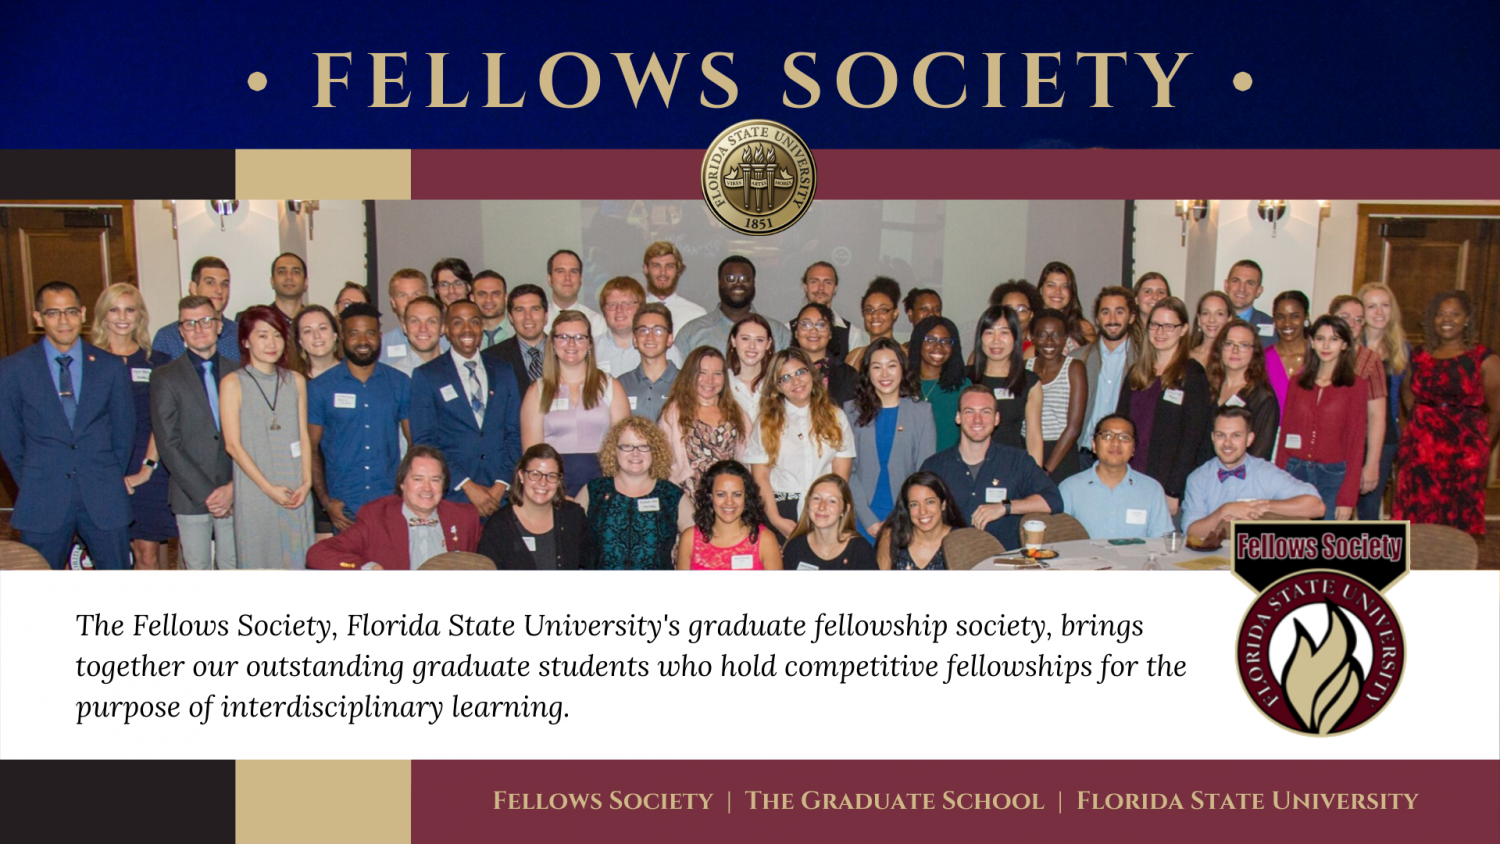 "Fellows Society The Fellows Society, Florida State University's graduate fellowship society, brings together our outstanding graduate students who hold competitive fellowships for the purpose of interdisciplinary learning."